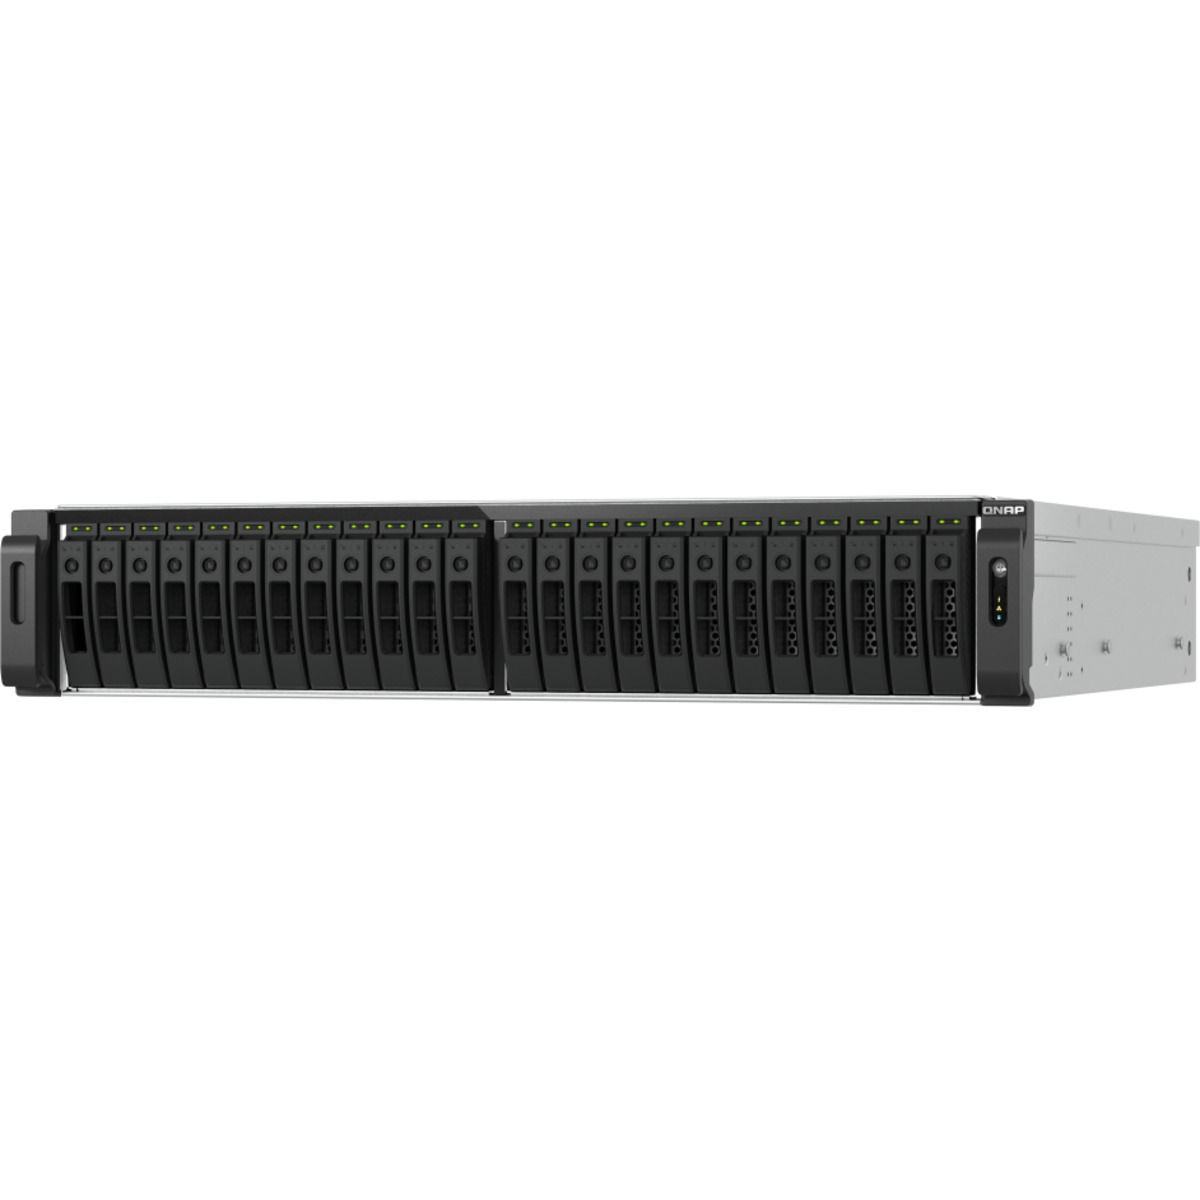 QNAP TS-h3077AFU Ryzen 7 All-Flash ZFS 28tb 30-Bay RackMount Large Business / Enterprise NAS - Network Attached Storage Device 28x1tb Crucial MX500 CT1000MX500SSD1 2.5 560/510MB/s SATA 6Gb/s SSD CONSUMER Class Drives Installed - Burn-In Tested TS-h3077AFU Ryzen 7 All-Flash ZFS